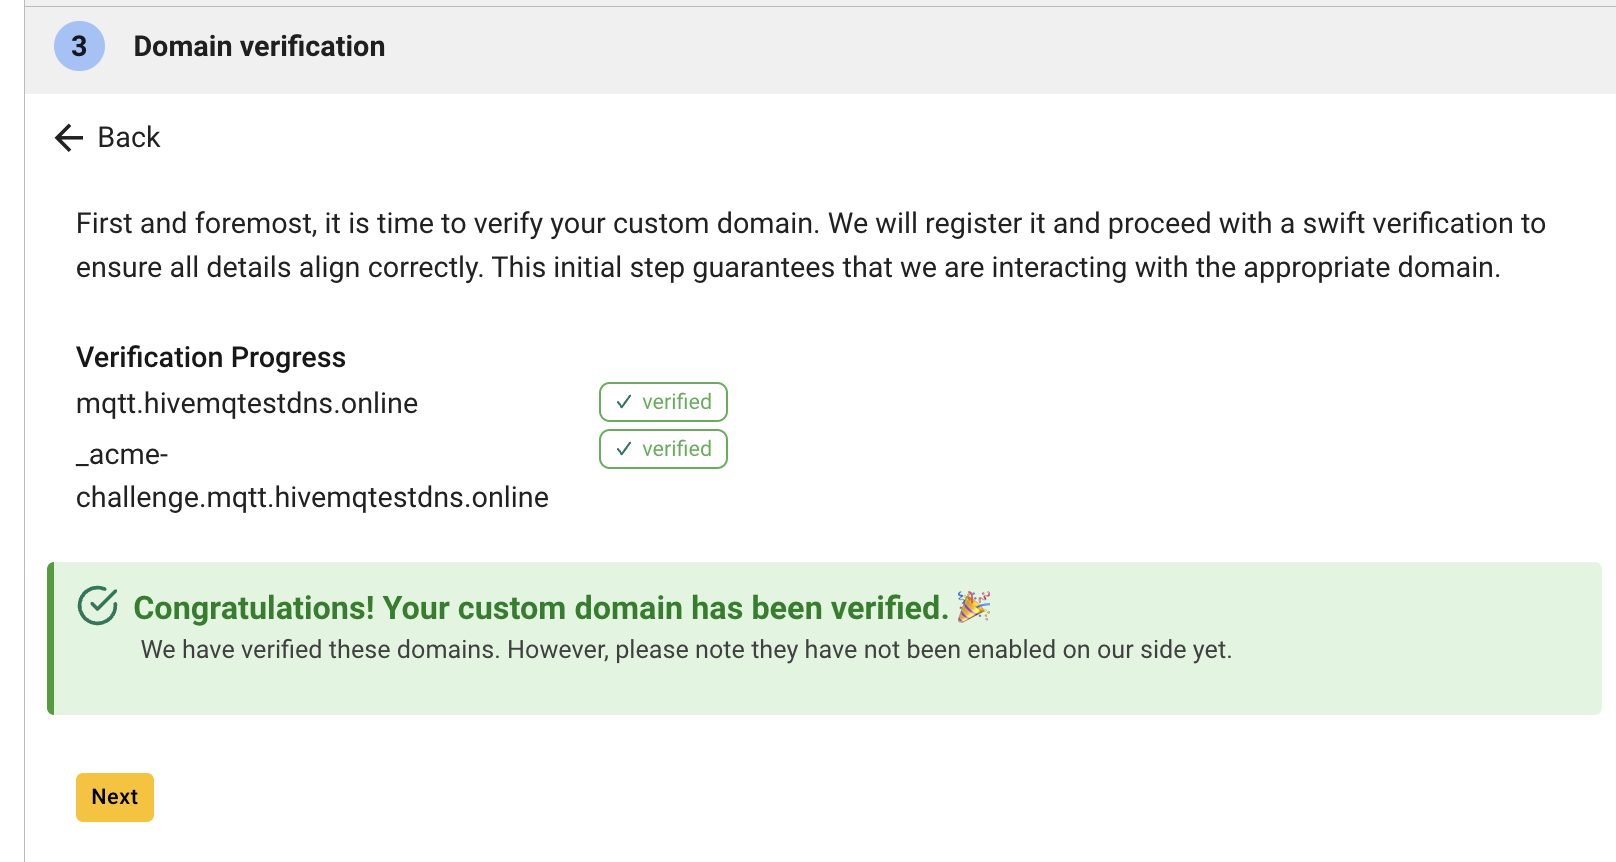 How to Get Domain Verification on HiveMQ Cloud Starter?